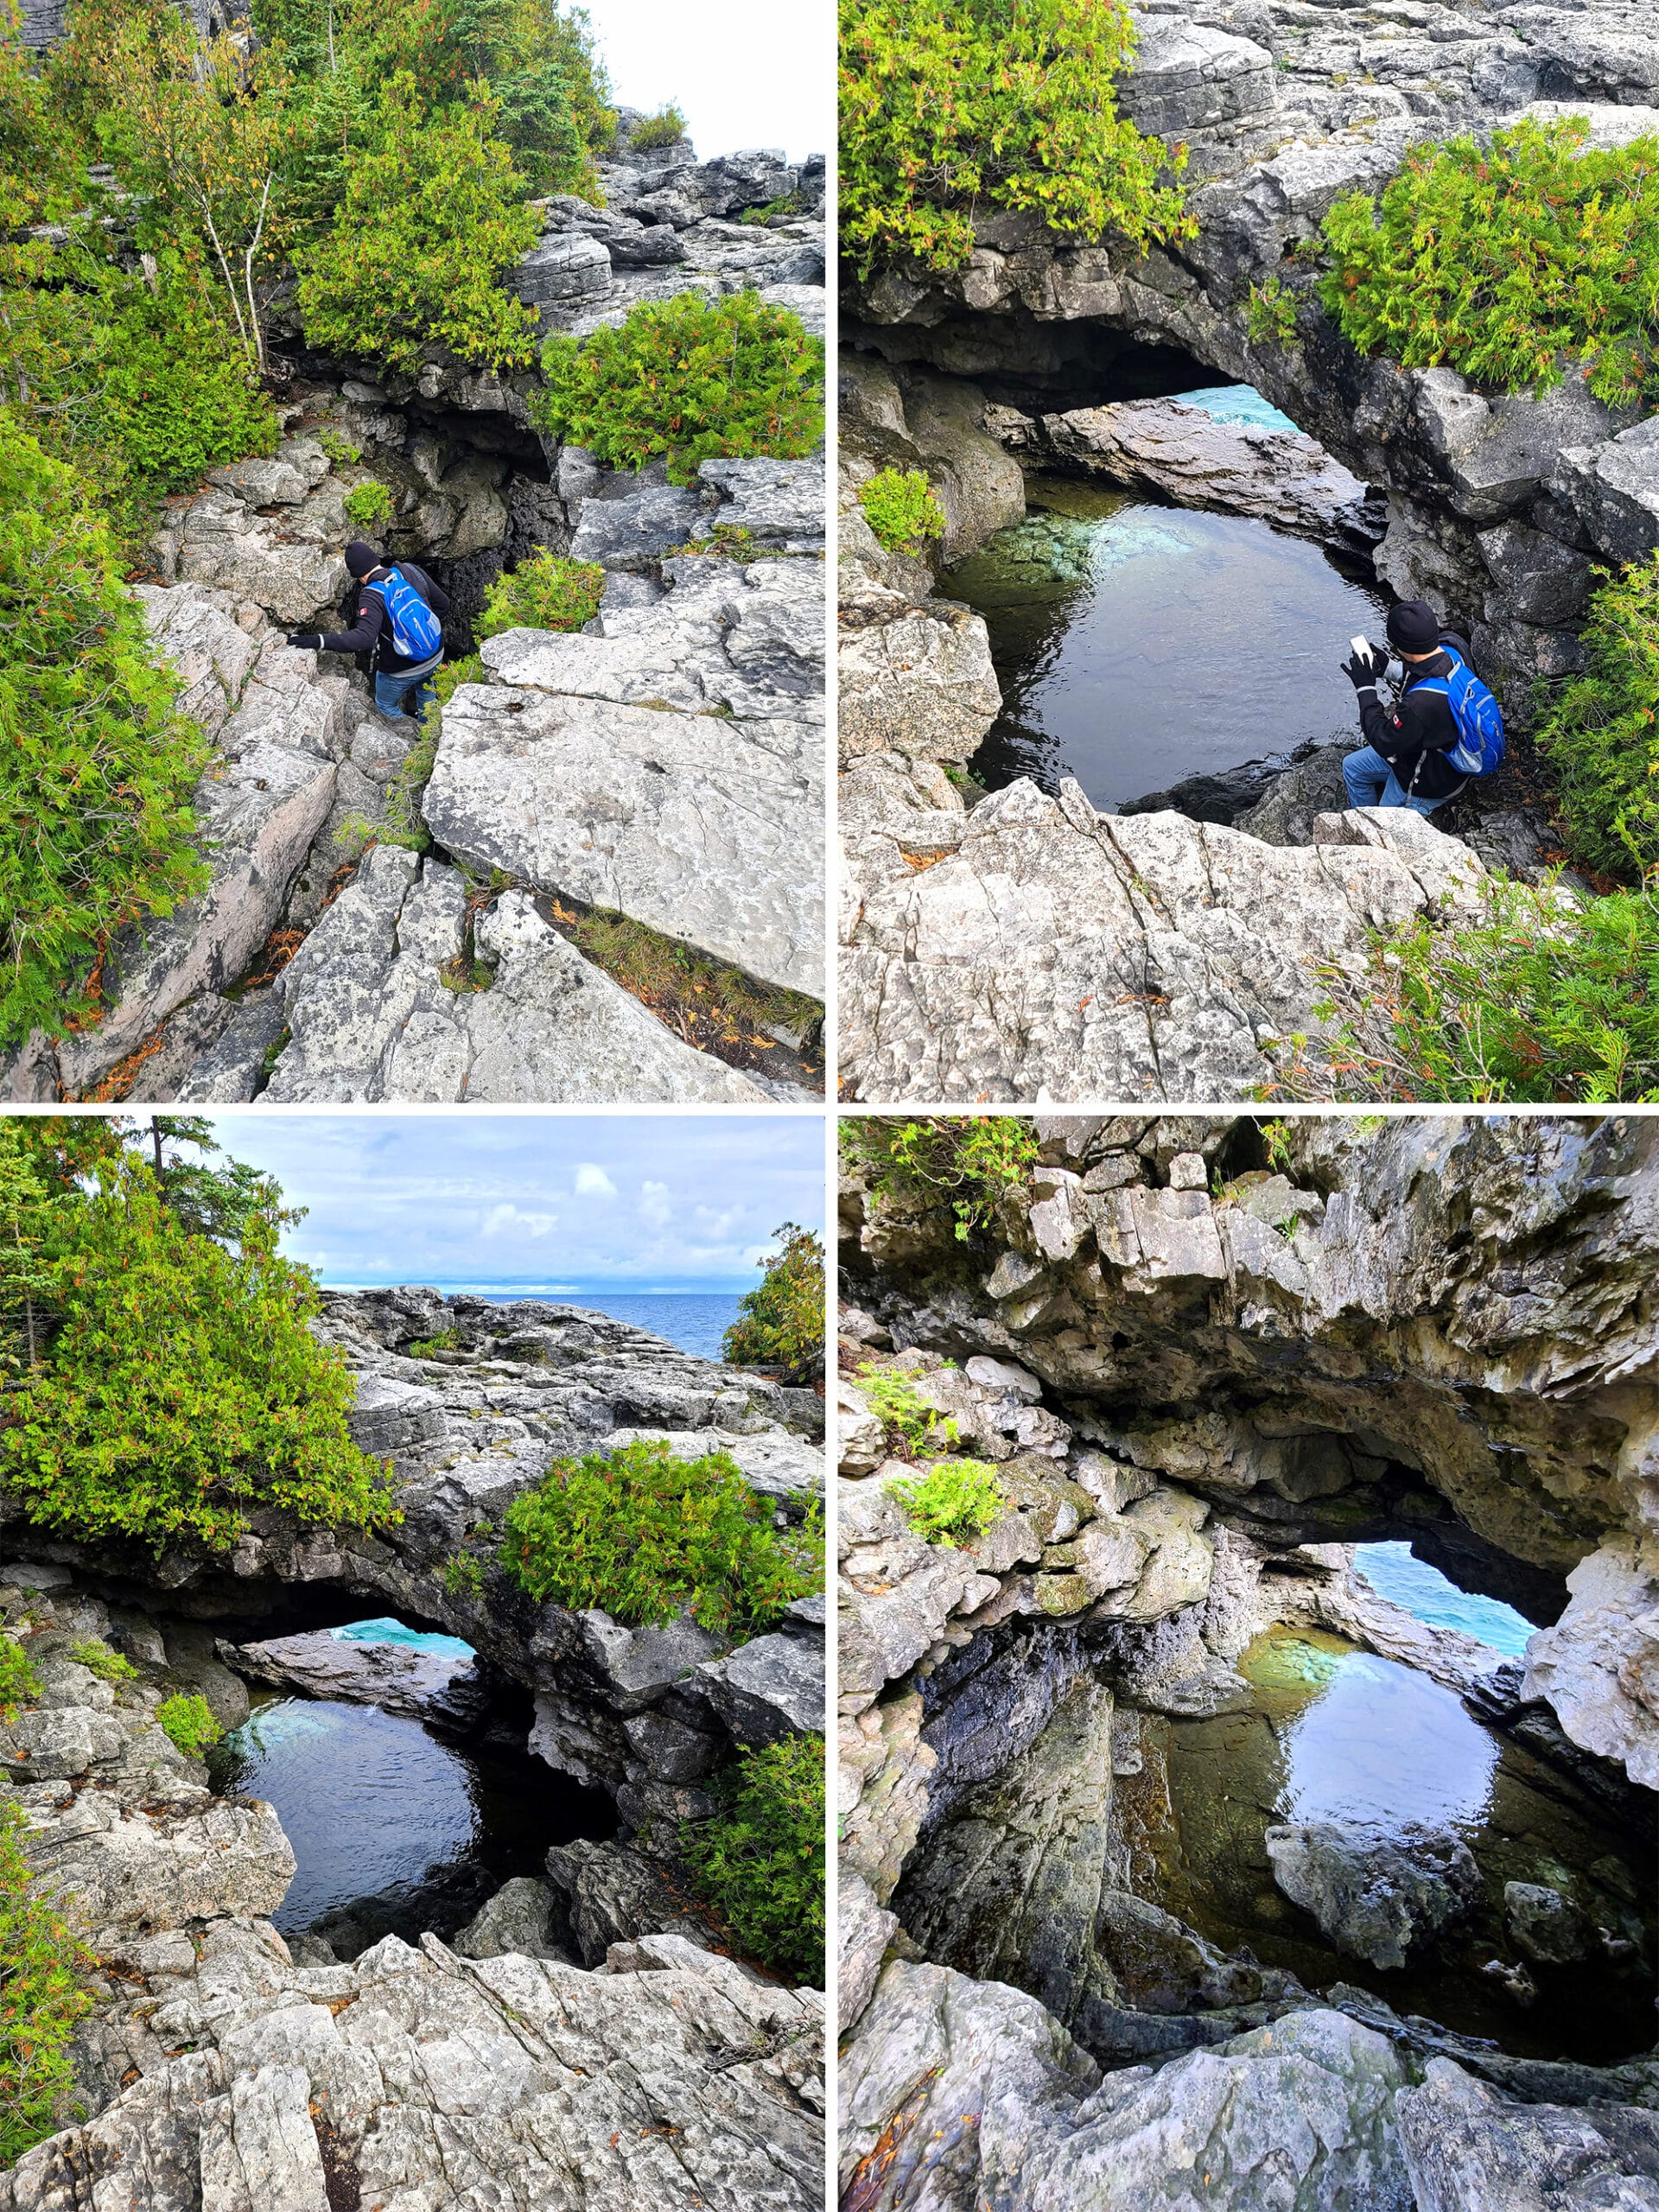 4 part image showing different views of the natural arch at Indian Head Cove - a rocky arch over a secluded pond.